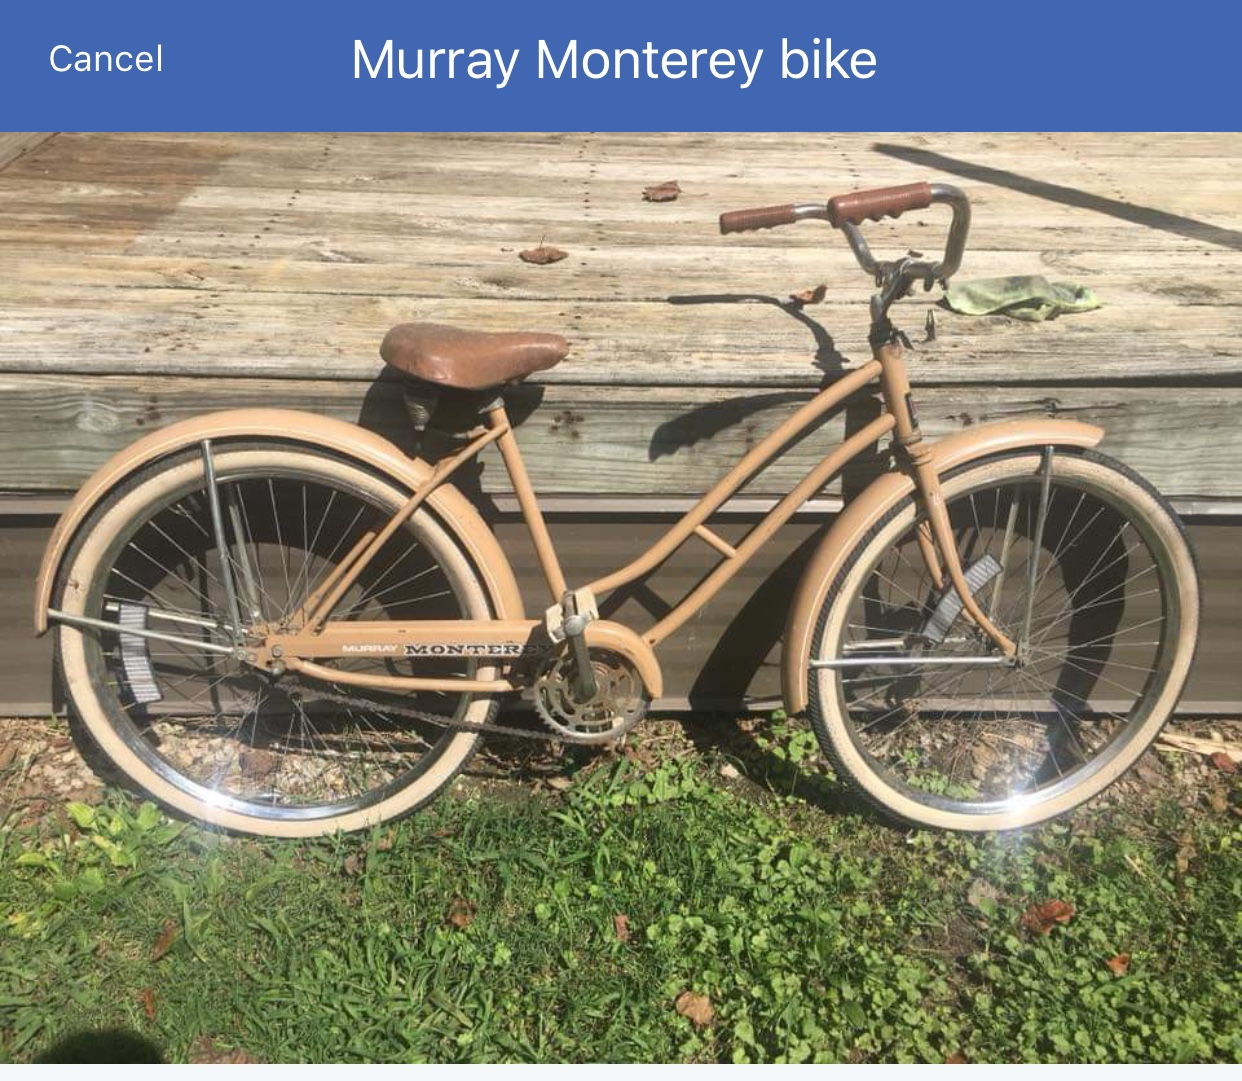 how much is a murray bike worth